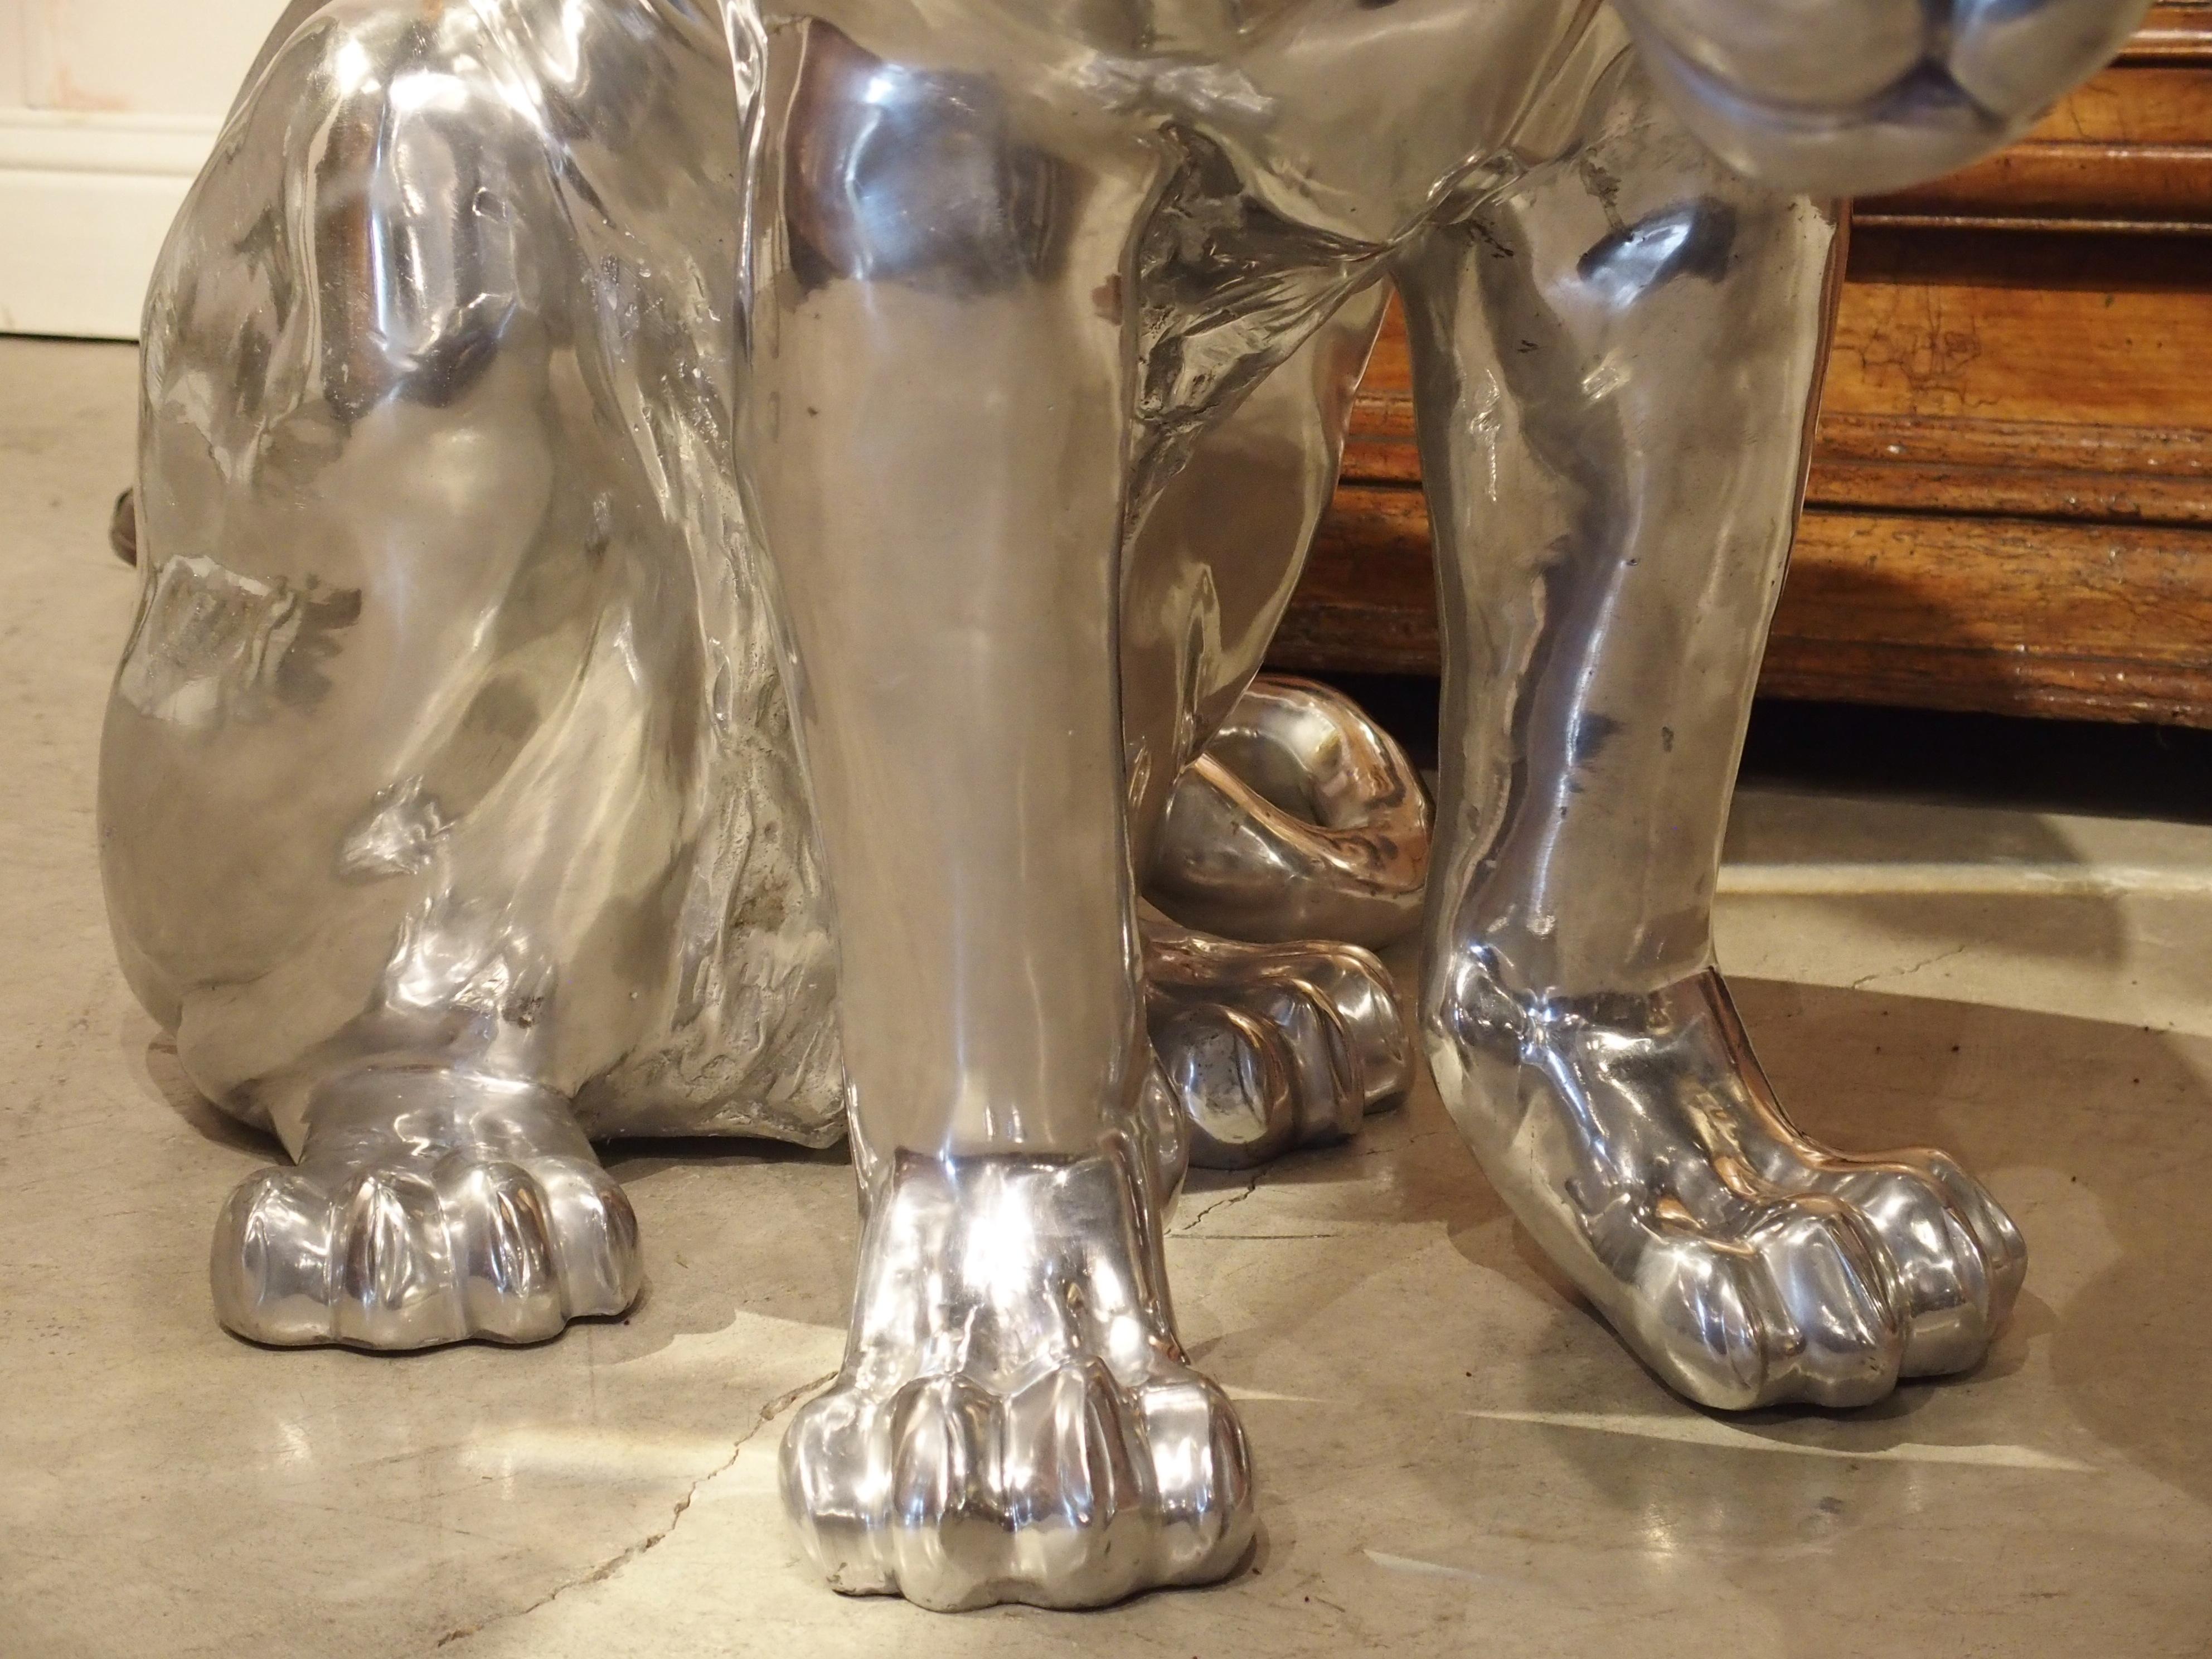 Cast Life-Sized Aluminum Panther by French Sculptor Christian Maas